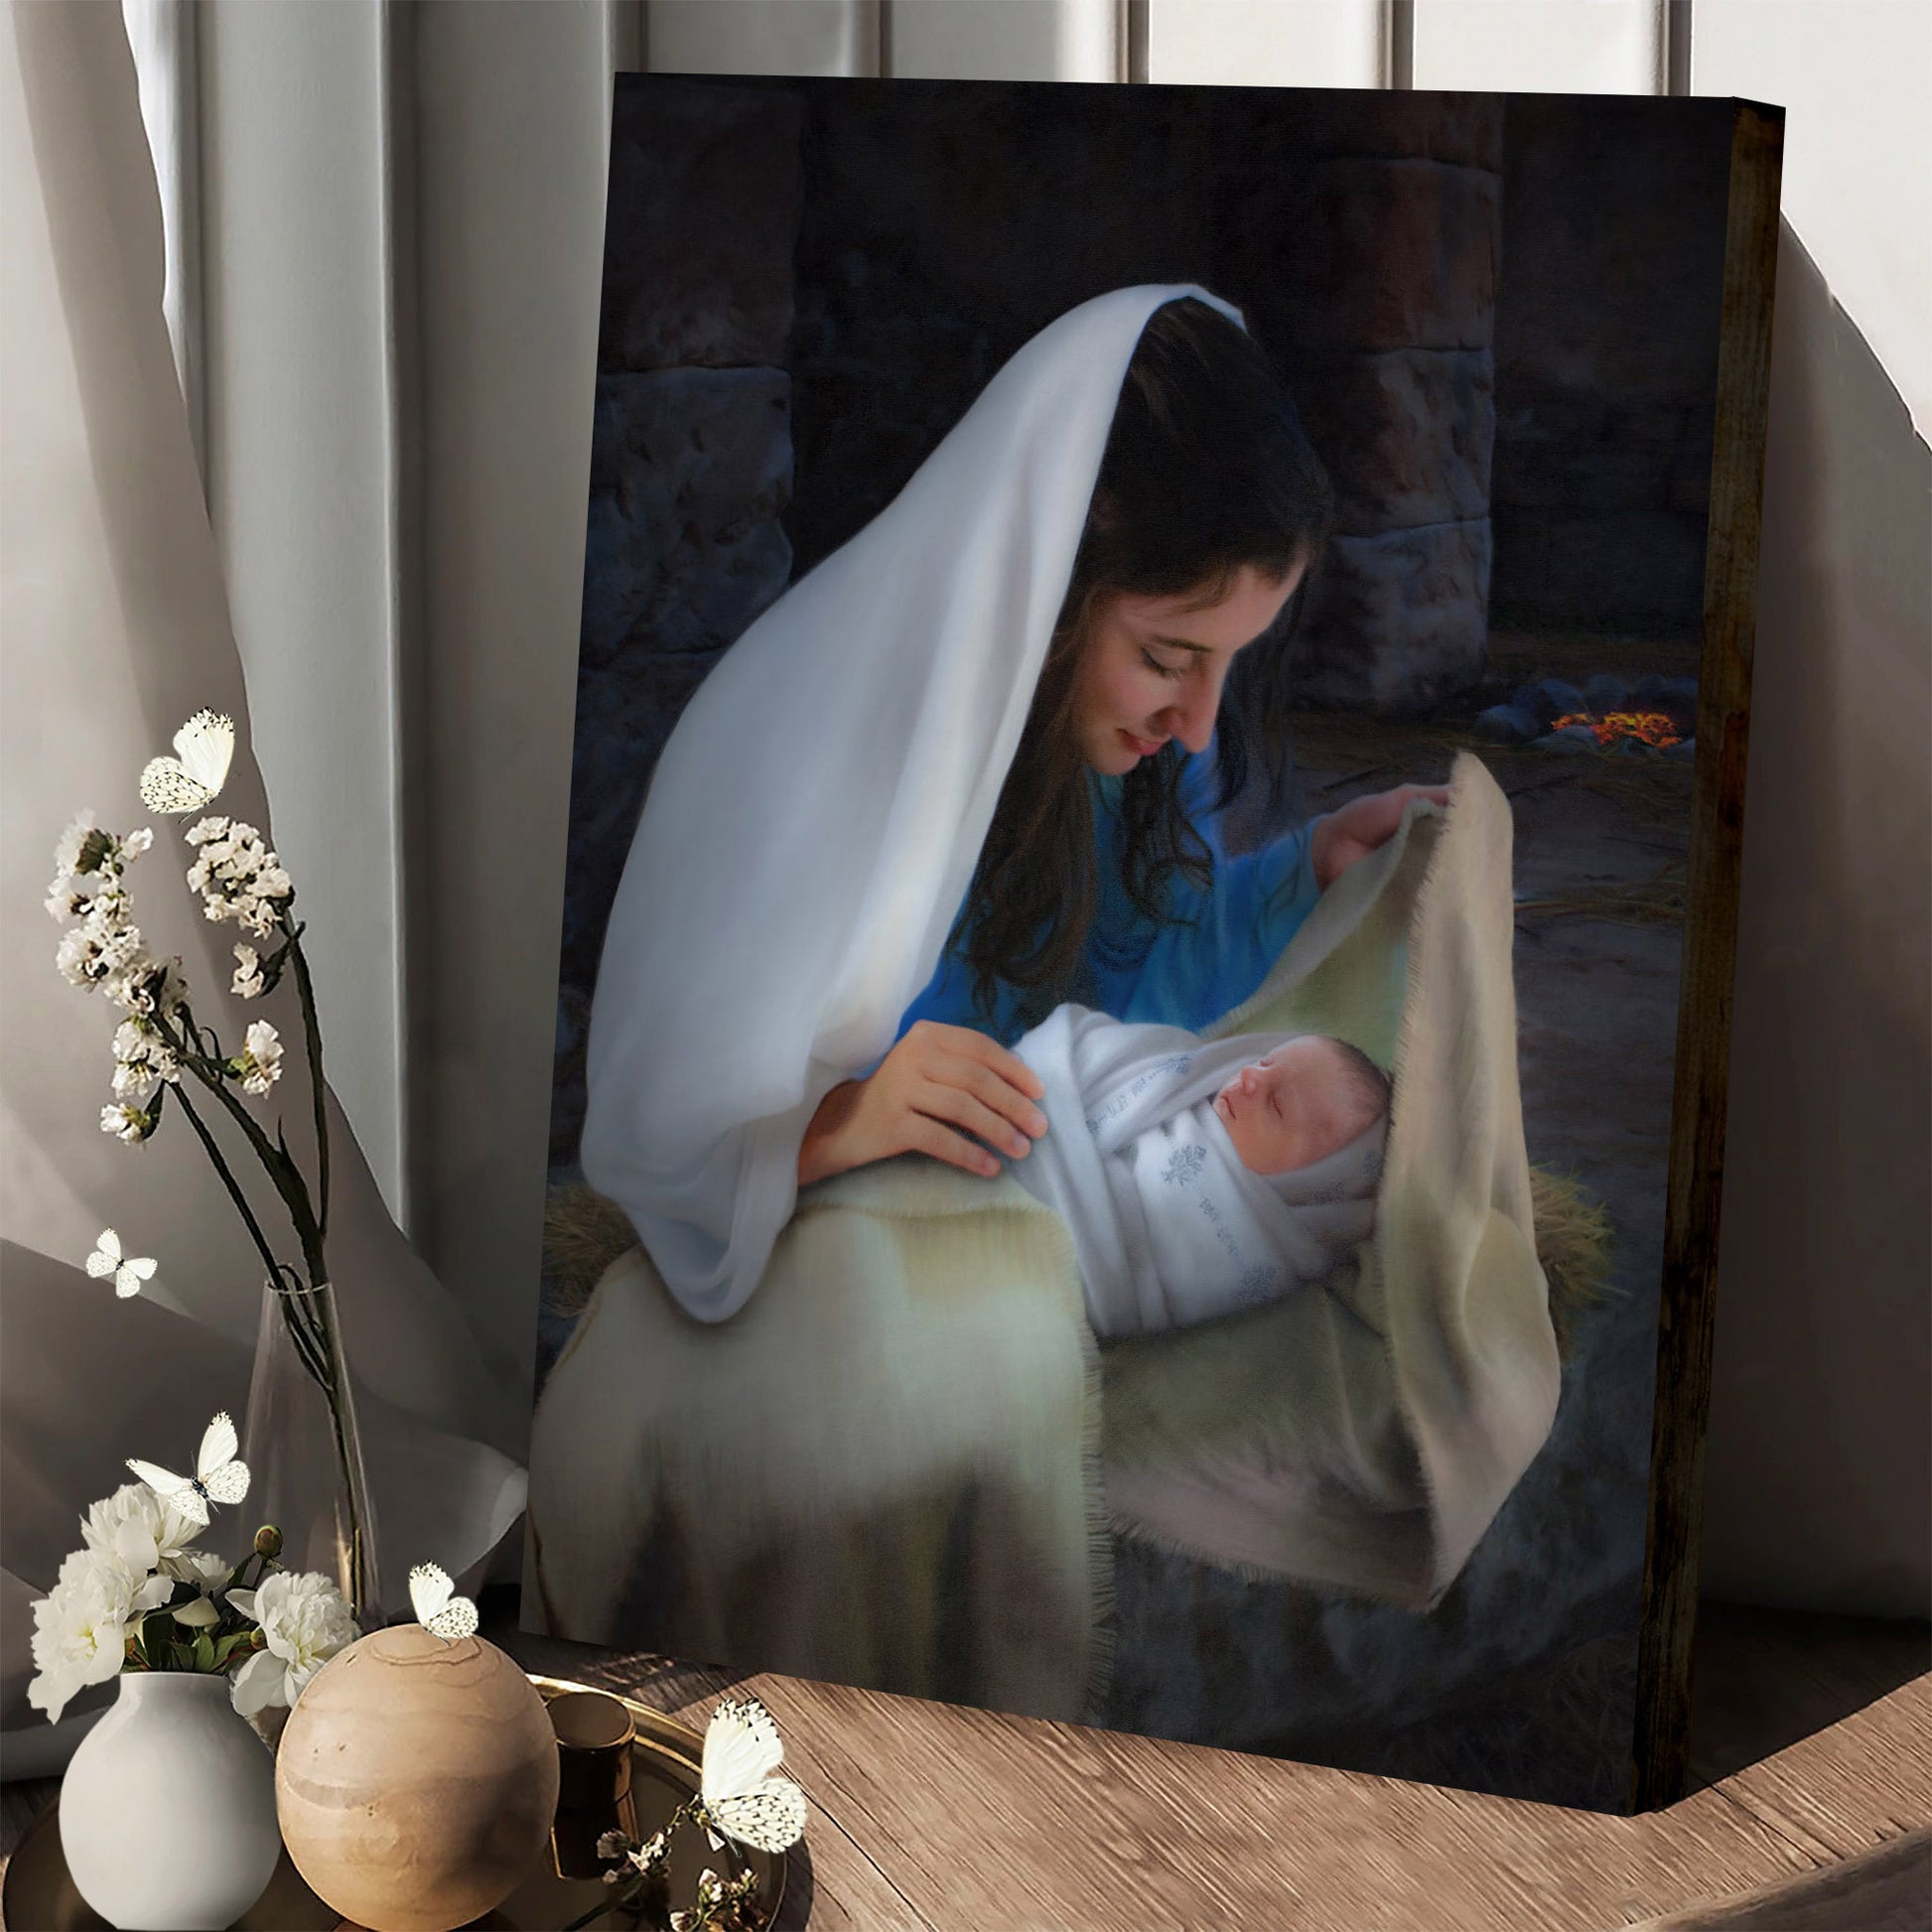 Away In The Manger Canvas Wall Art - Jesus Canvas Pictures - Christian Canvas Wall Art